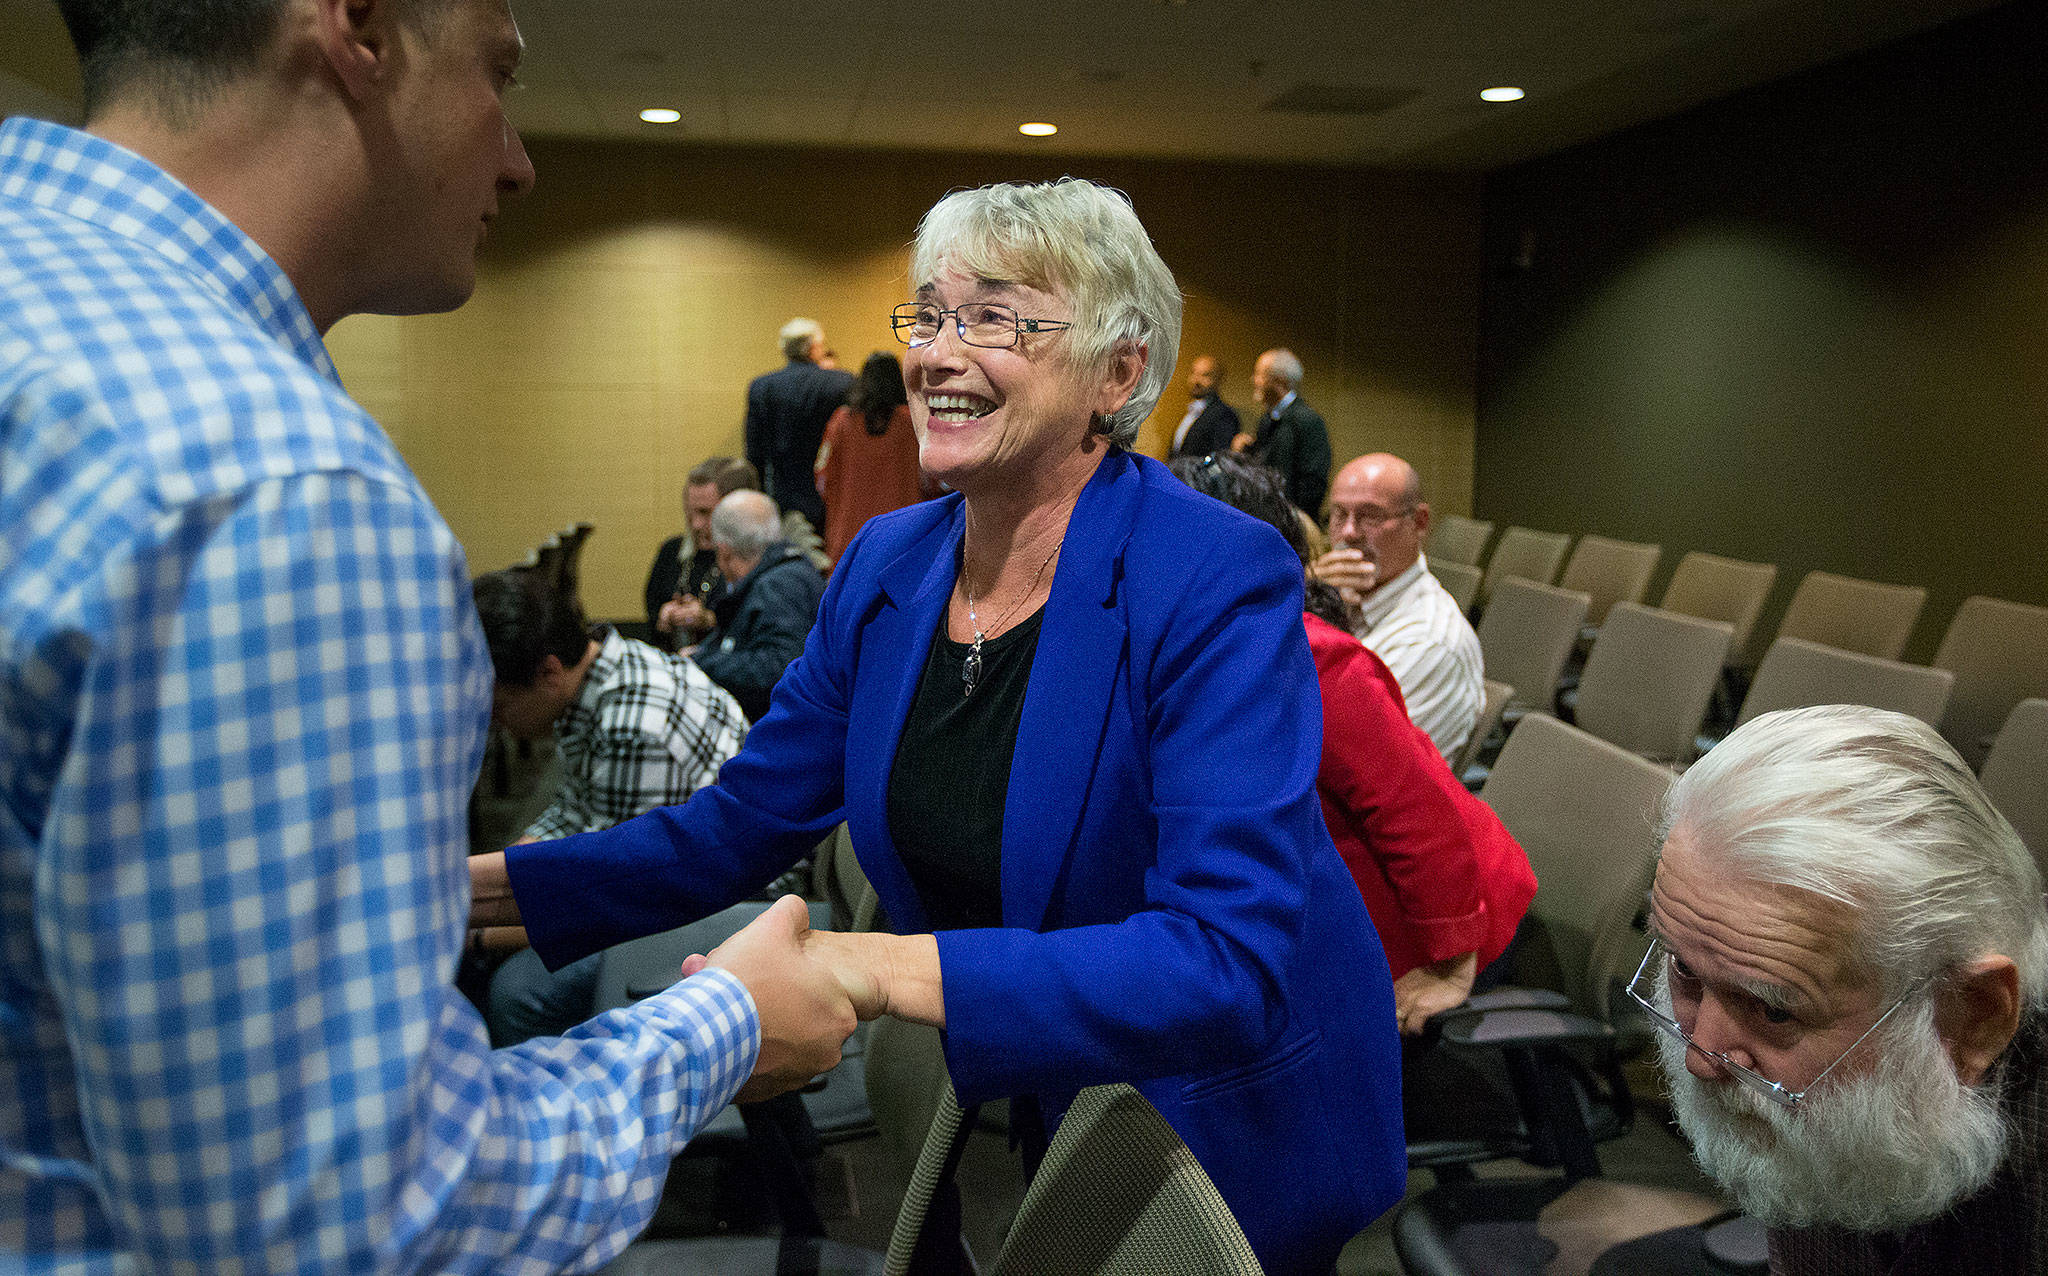 Sultan Mayor Carolyn Eslick is congratulated after she is appointed to fill a vacancy in the state’s House of Representatives at the Snohomish County Council Chambers on Wednesday in Everett. Eslick fills the position created by the resignation of Arlington Republican John Koster. (Andy Bronson / The Herald)